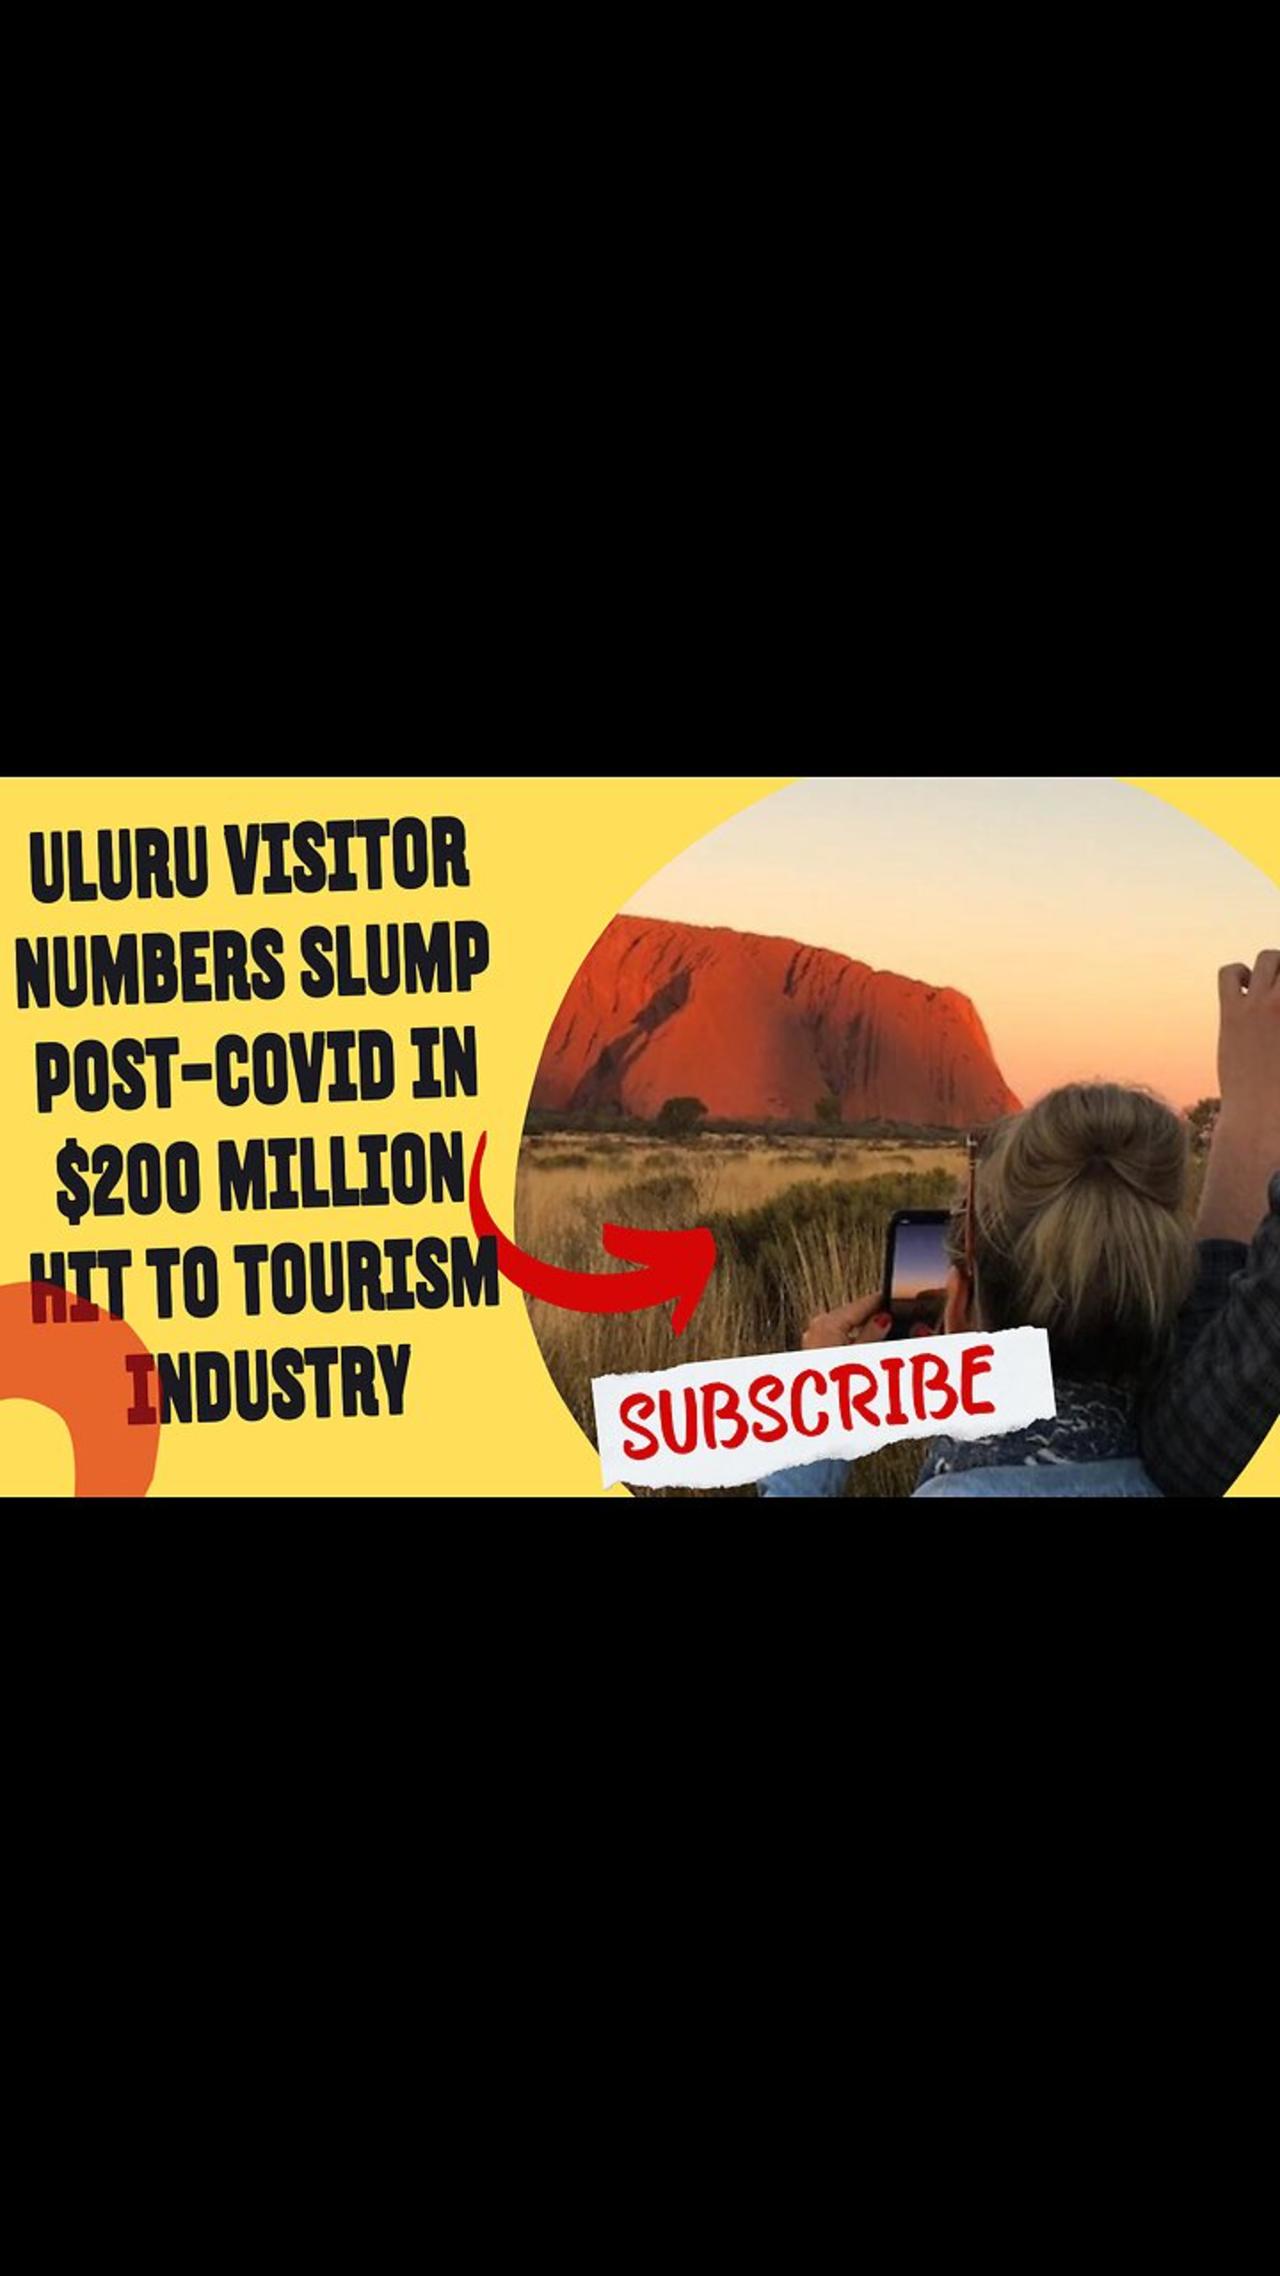 Uluru visitor numbers slump post-COVID in $200 million hit to tourism industry